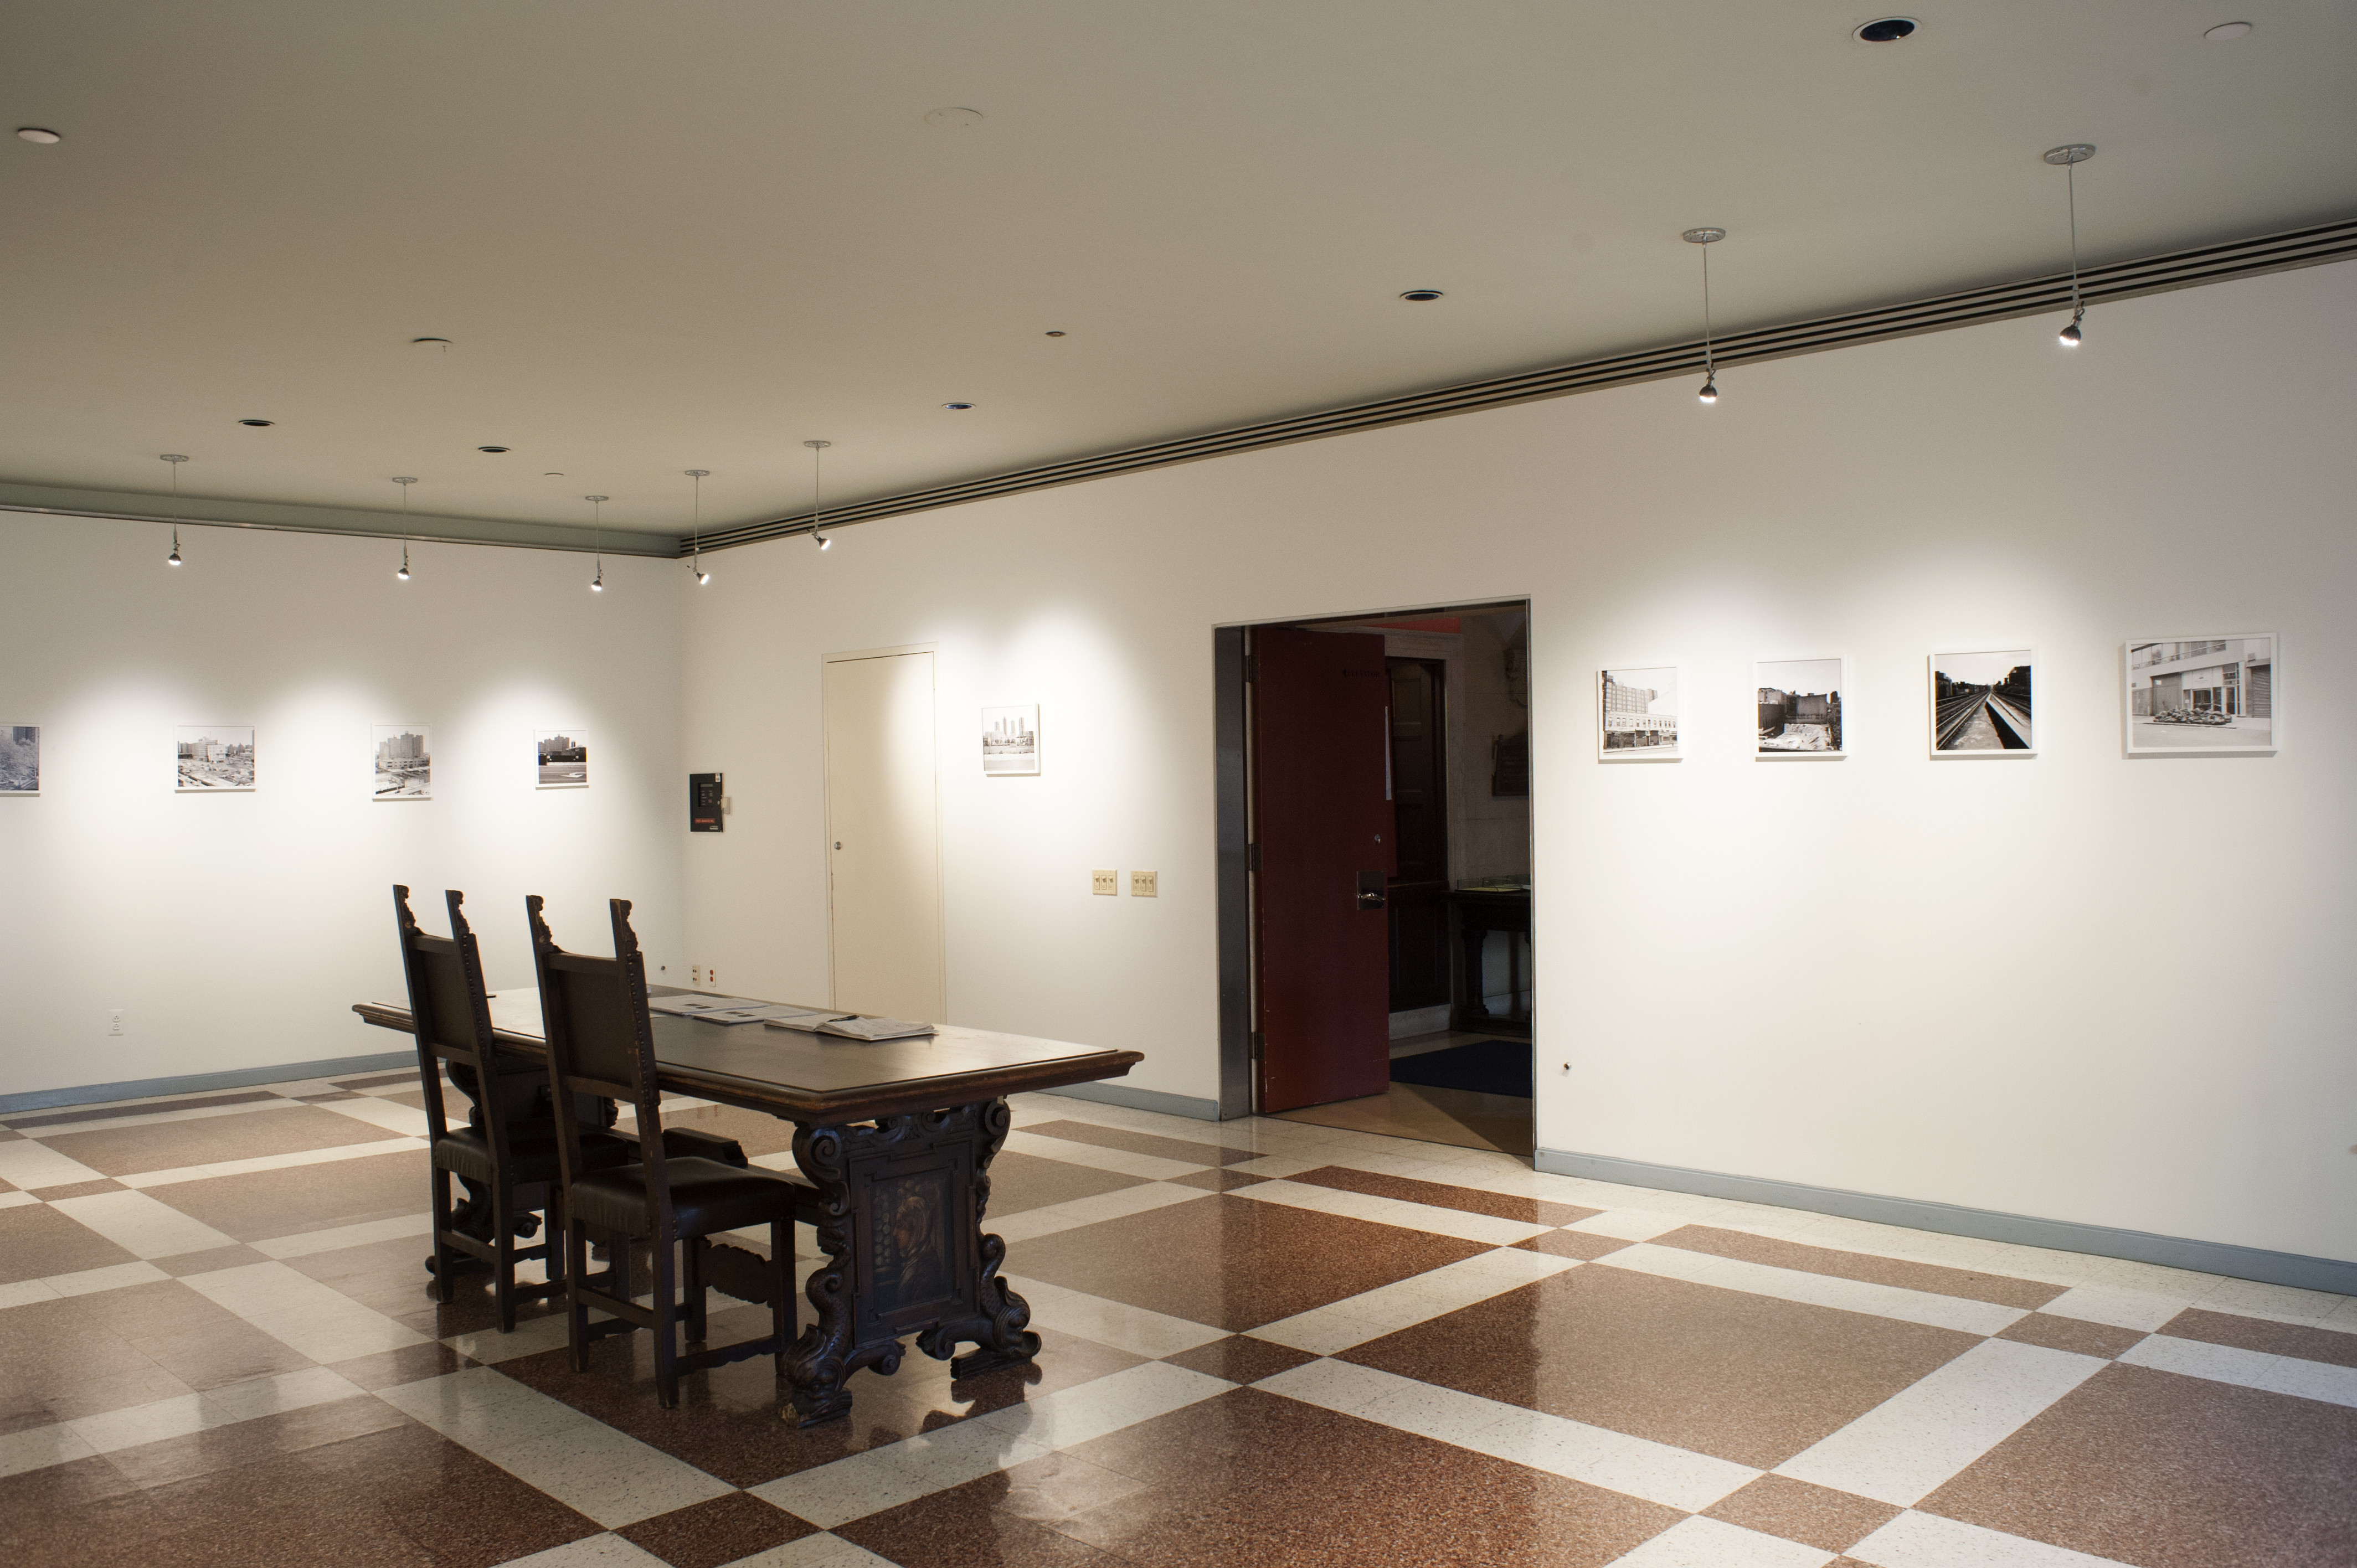 Photo of an exhibition space with photos hung on the wall